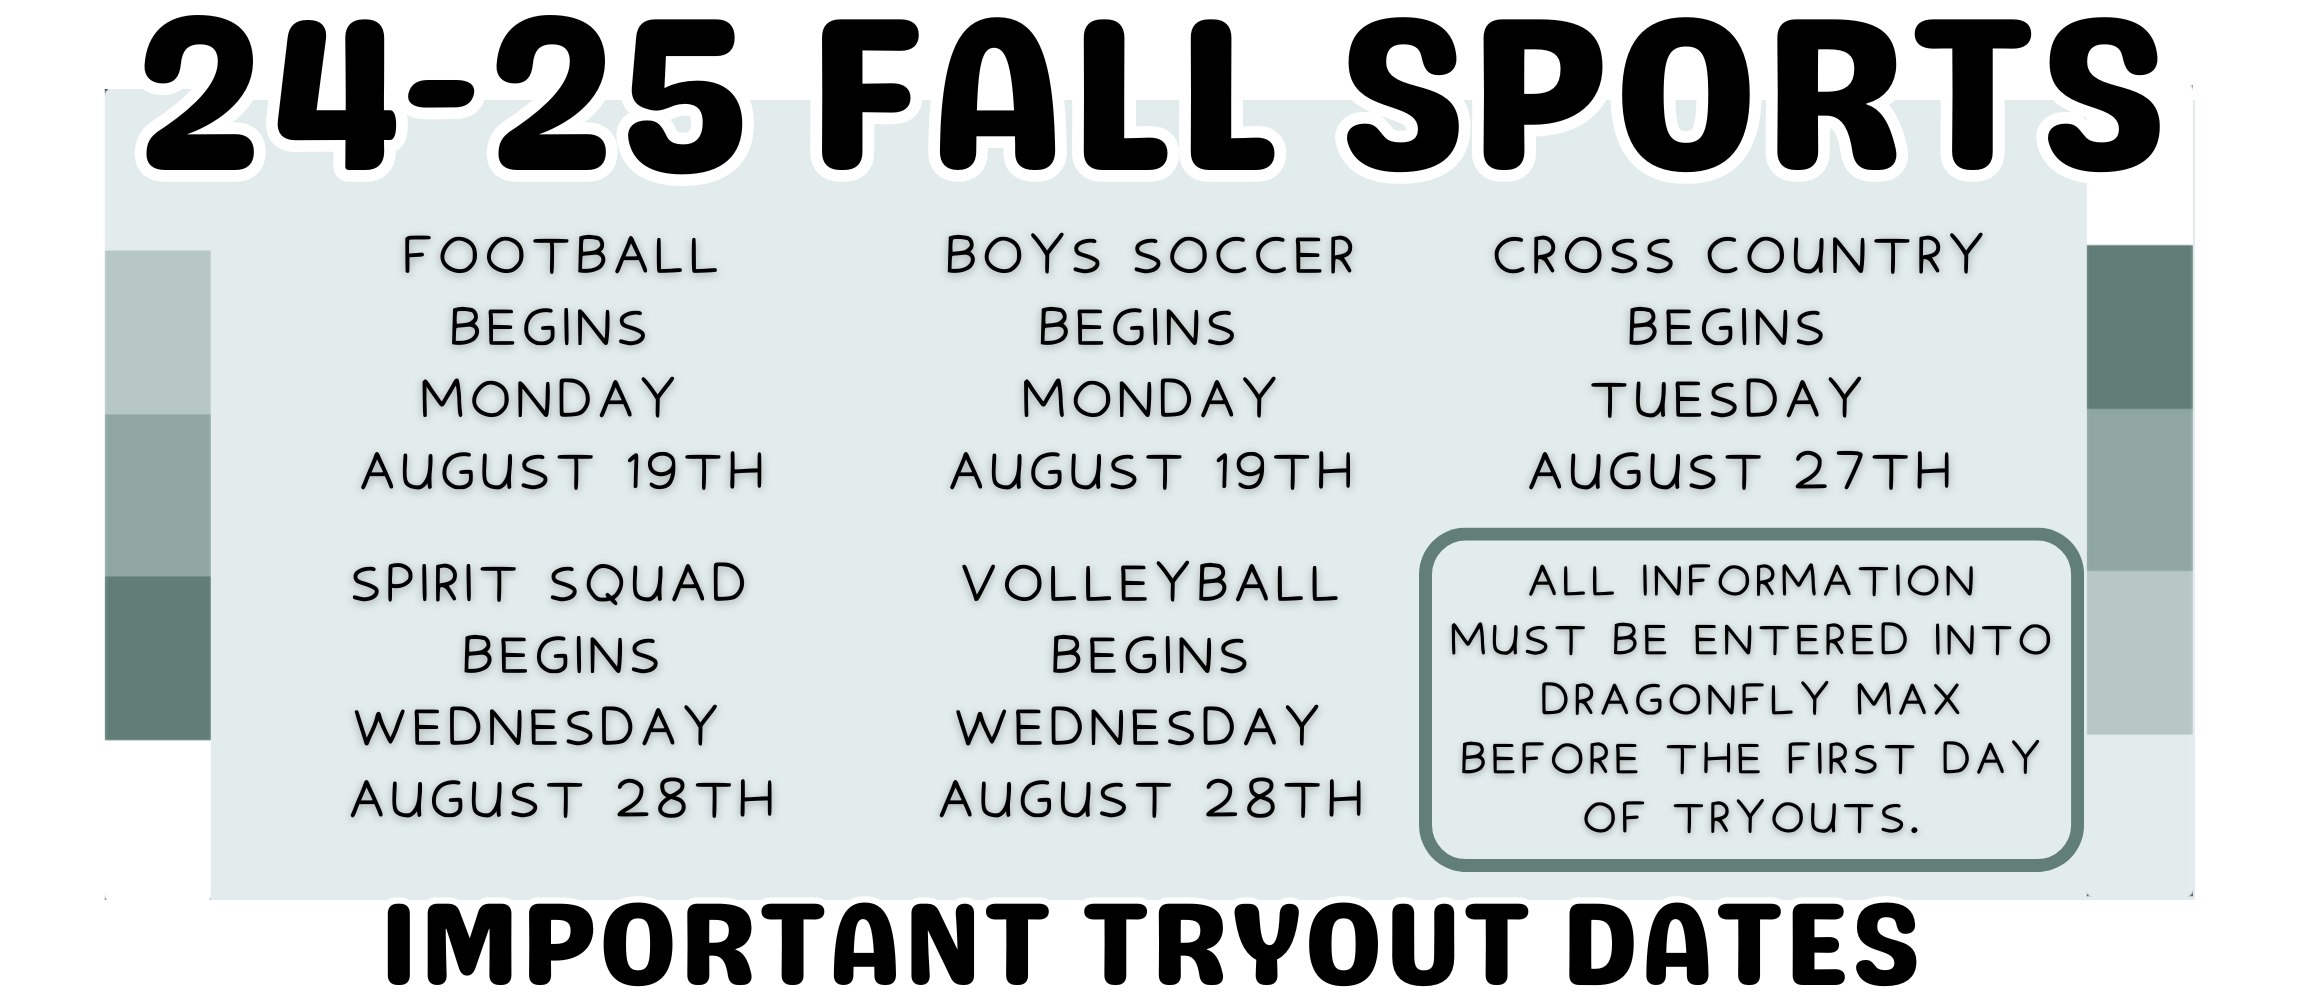 24-25 Fall Sports Tryouts